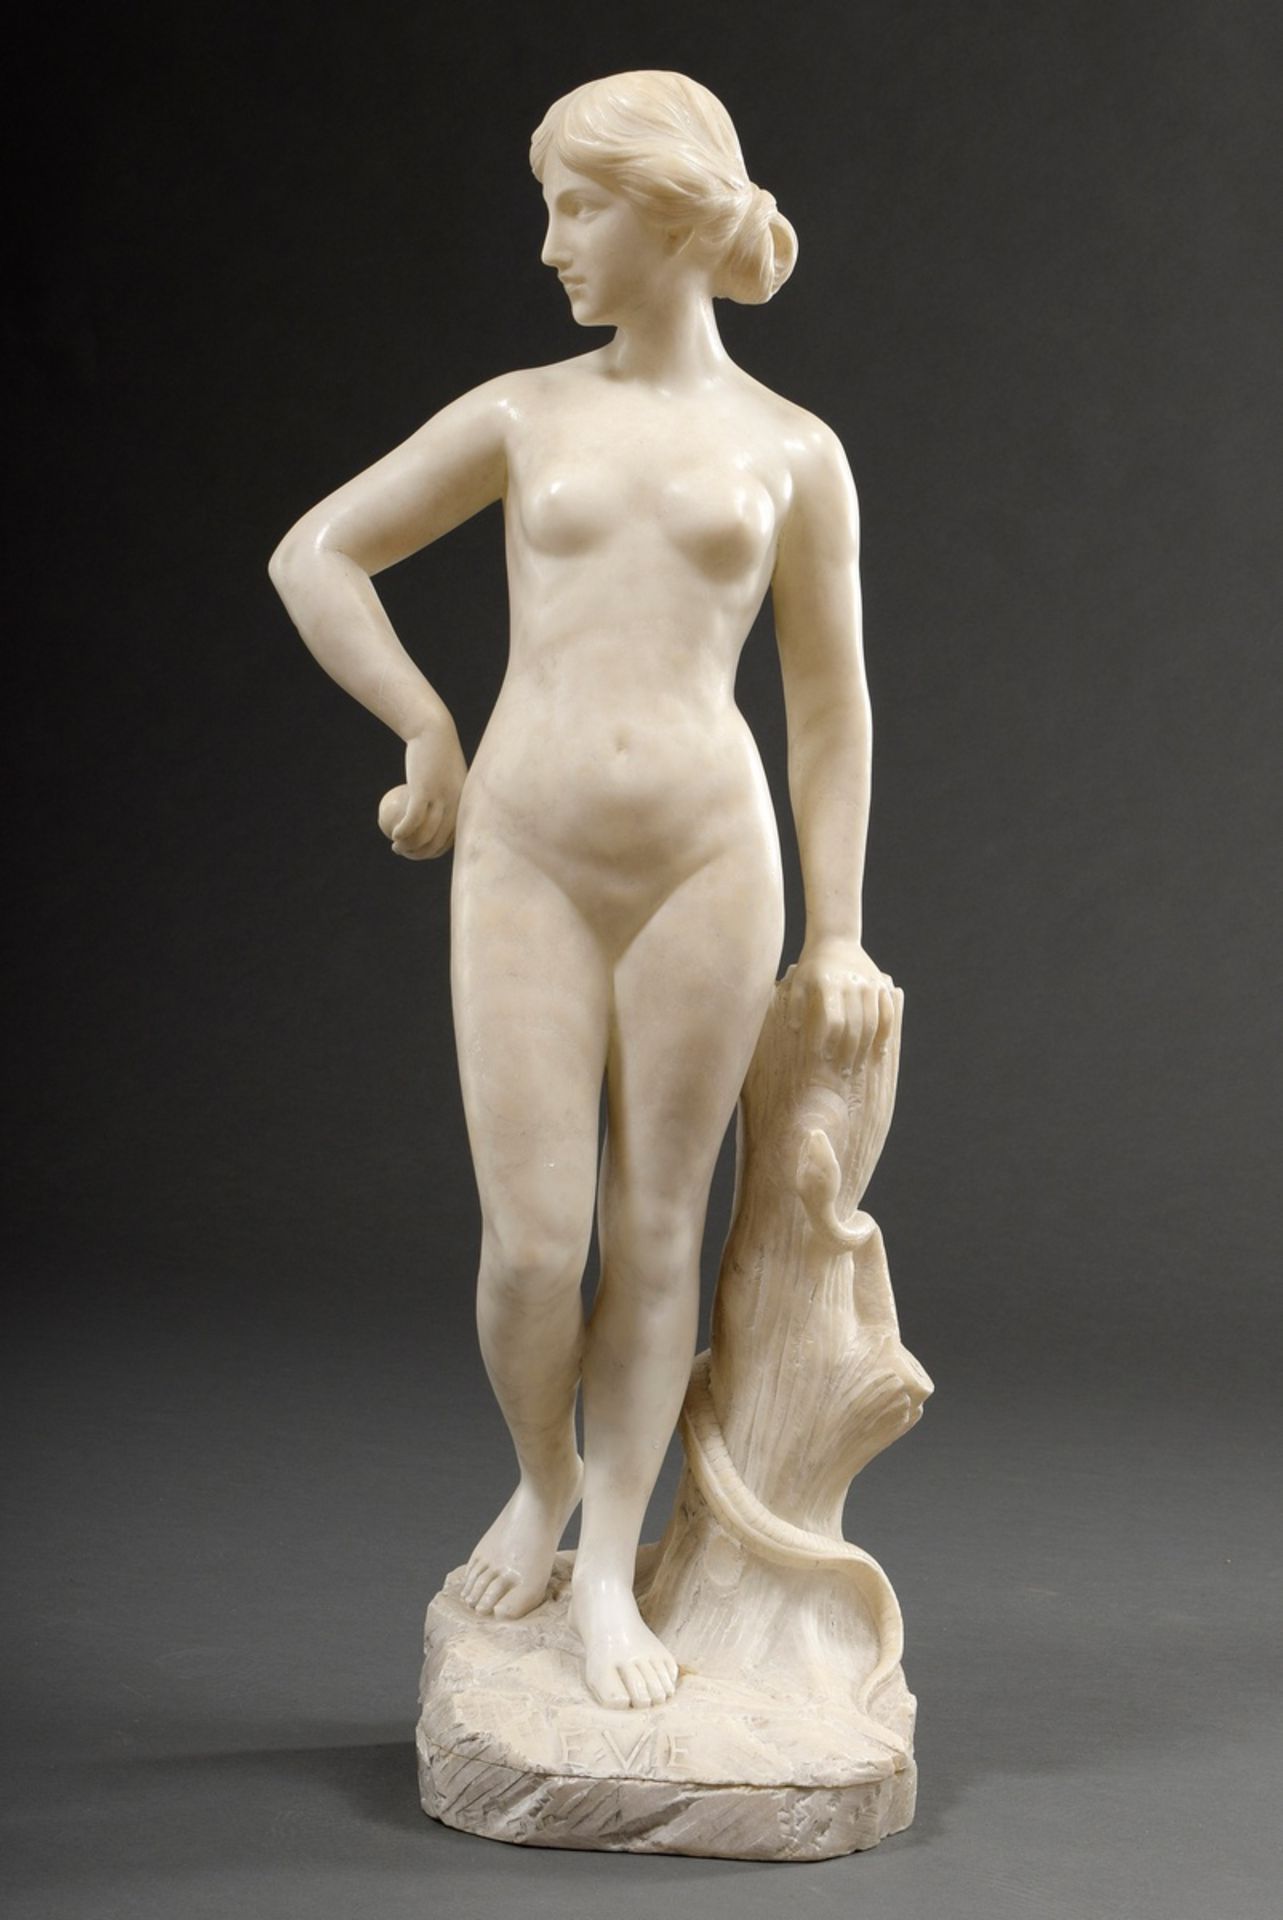 Unknown artist c. 1900/1910 "Eve with apple and snake", front inscribed: "Eve", marble, h. 71cm